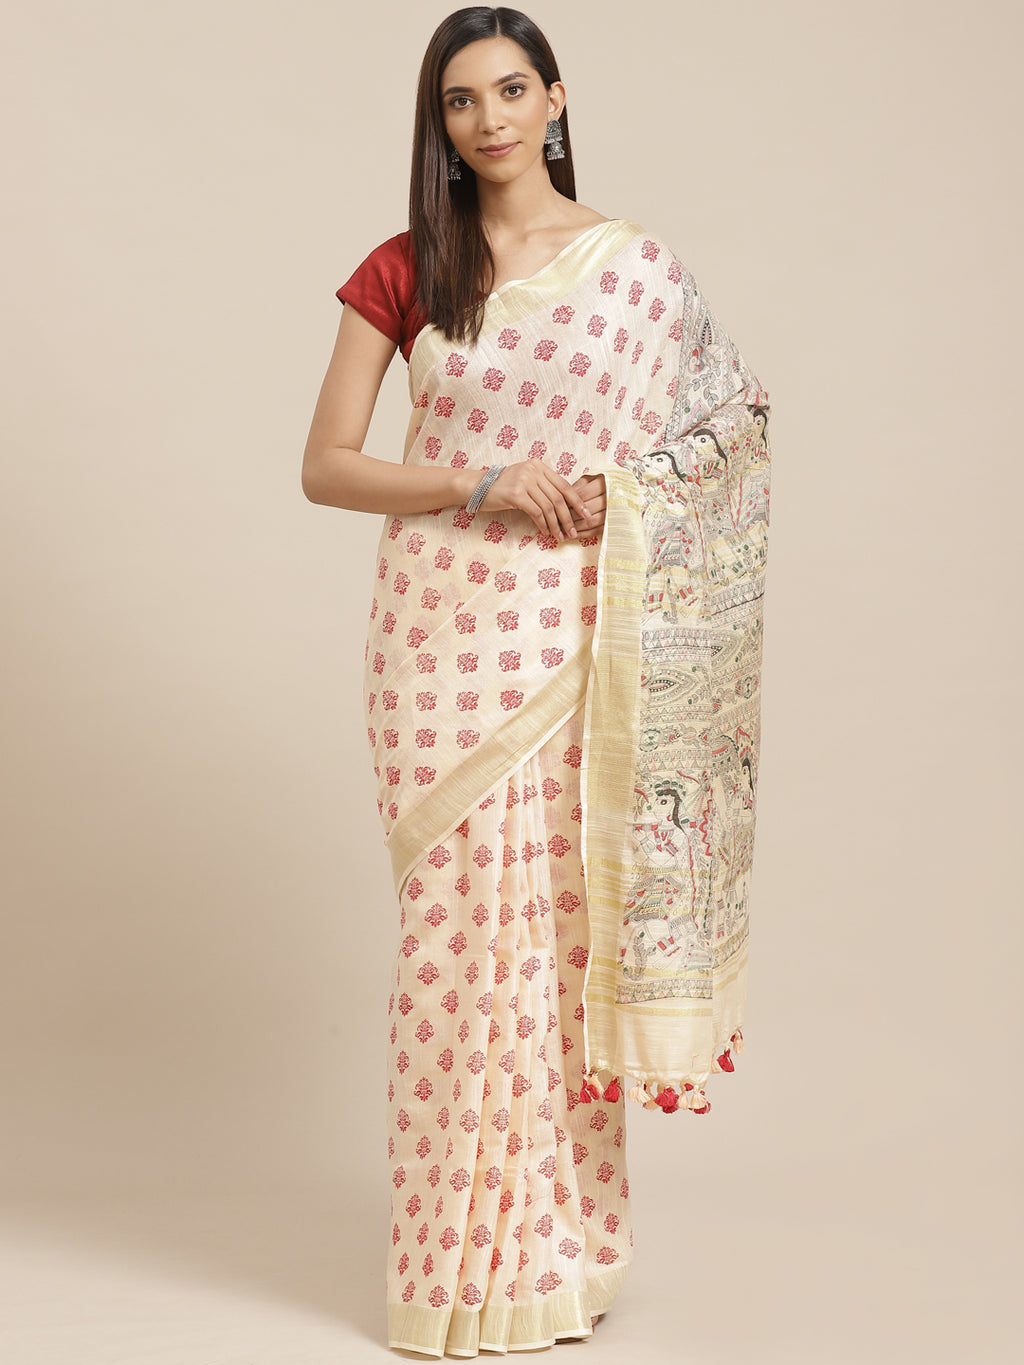 Peach and Red, Kalakari India Linen Handwoven Saree and Blouse ALBGSA0096-Saree-Kalakari India-ALBGSA0096-Cotton, Geographical Indication, Hand Crafted, Heritage Prints, Linen, Natural Dyes, Red, Sarees, Shibori, Sustainable Fabrics, Woven, Yellow-[Linen,Ethnic,wear,Fashionista,Handloom,Handicraft,Indigo,blockprint,block,print,Cotton,Chanderi,Blue, latest,classy,party,bollywood,trendy,summer,style,traditional,formal,elegant,unique,style,hand,block,print, dabu,booti,gift,present,glamorous,afforda